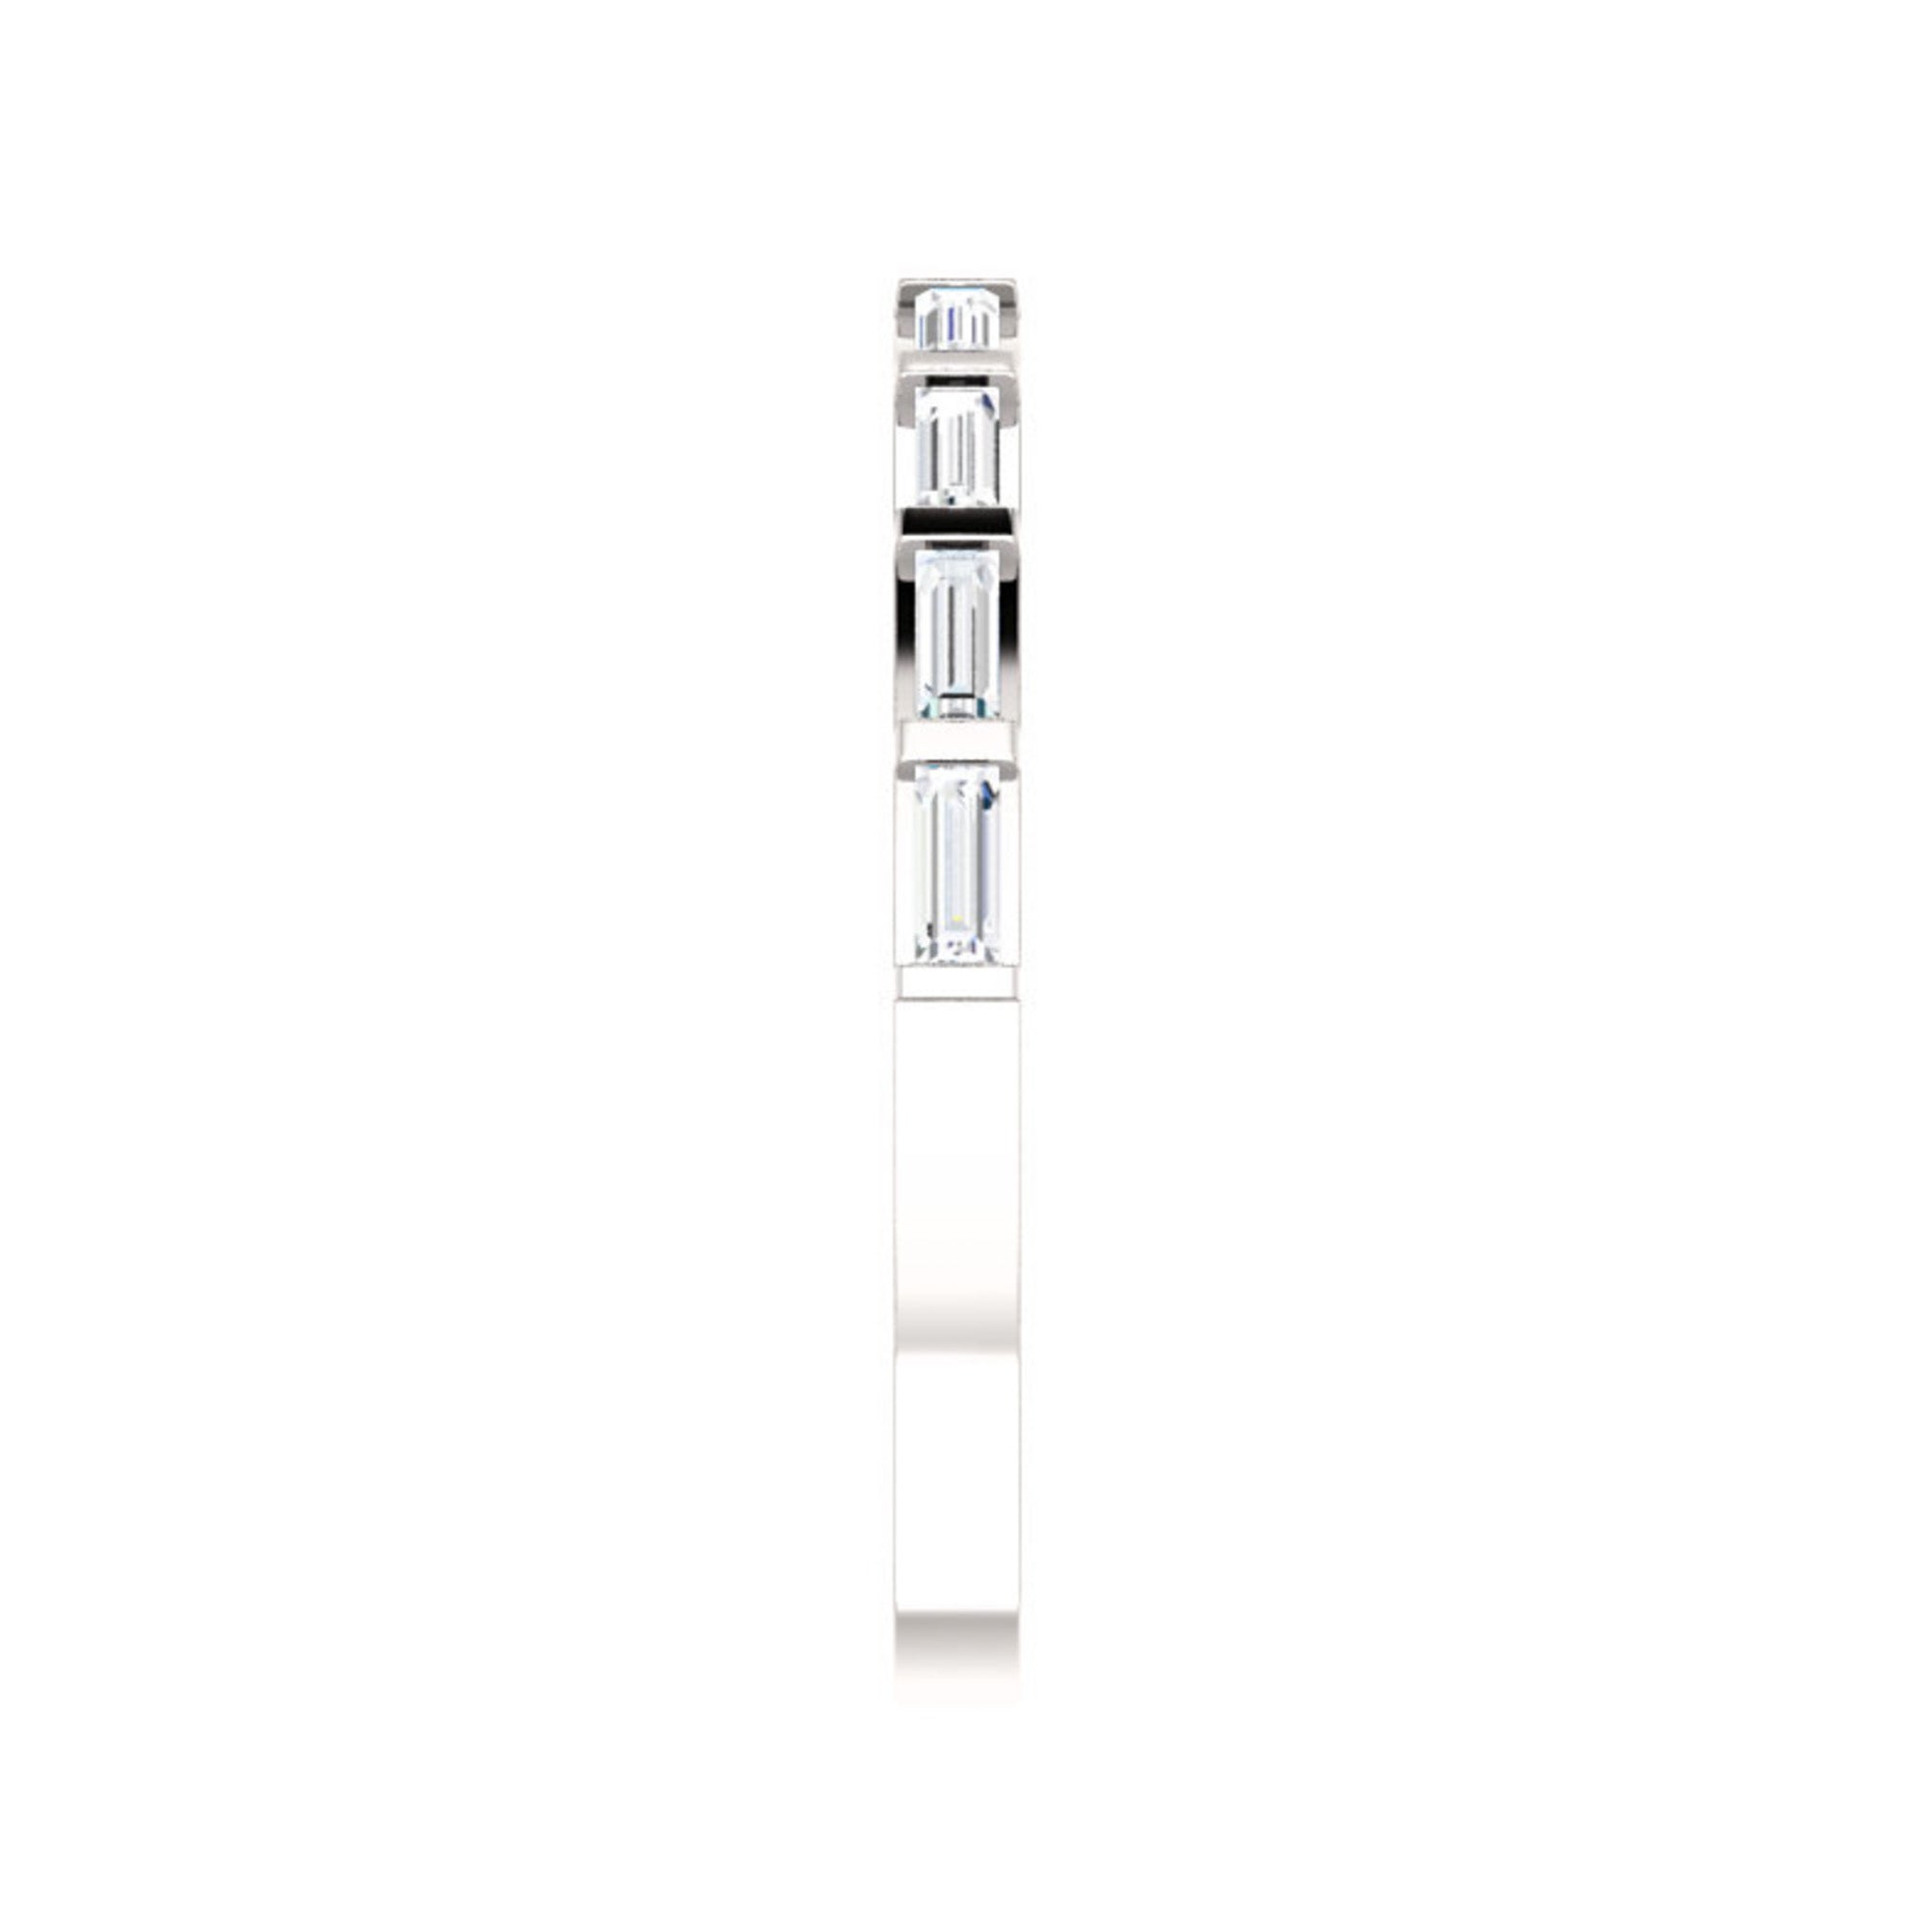 Straight Baguette Diamond Stack Band in White, Yellow or Rose Gold - Talisman Collection Fine Jewelers